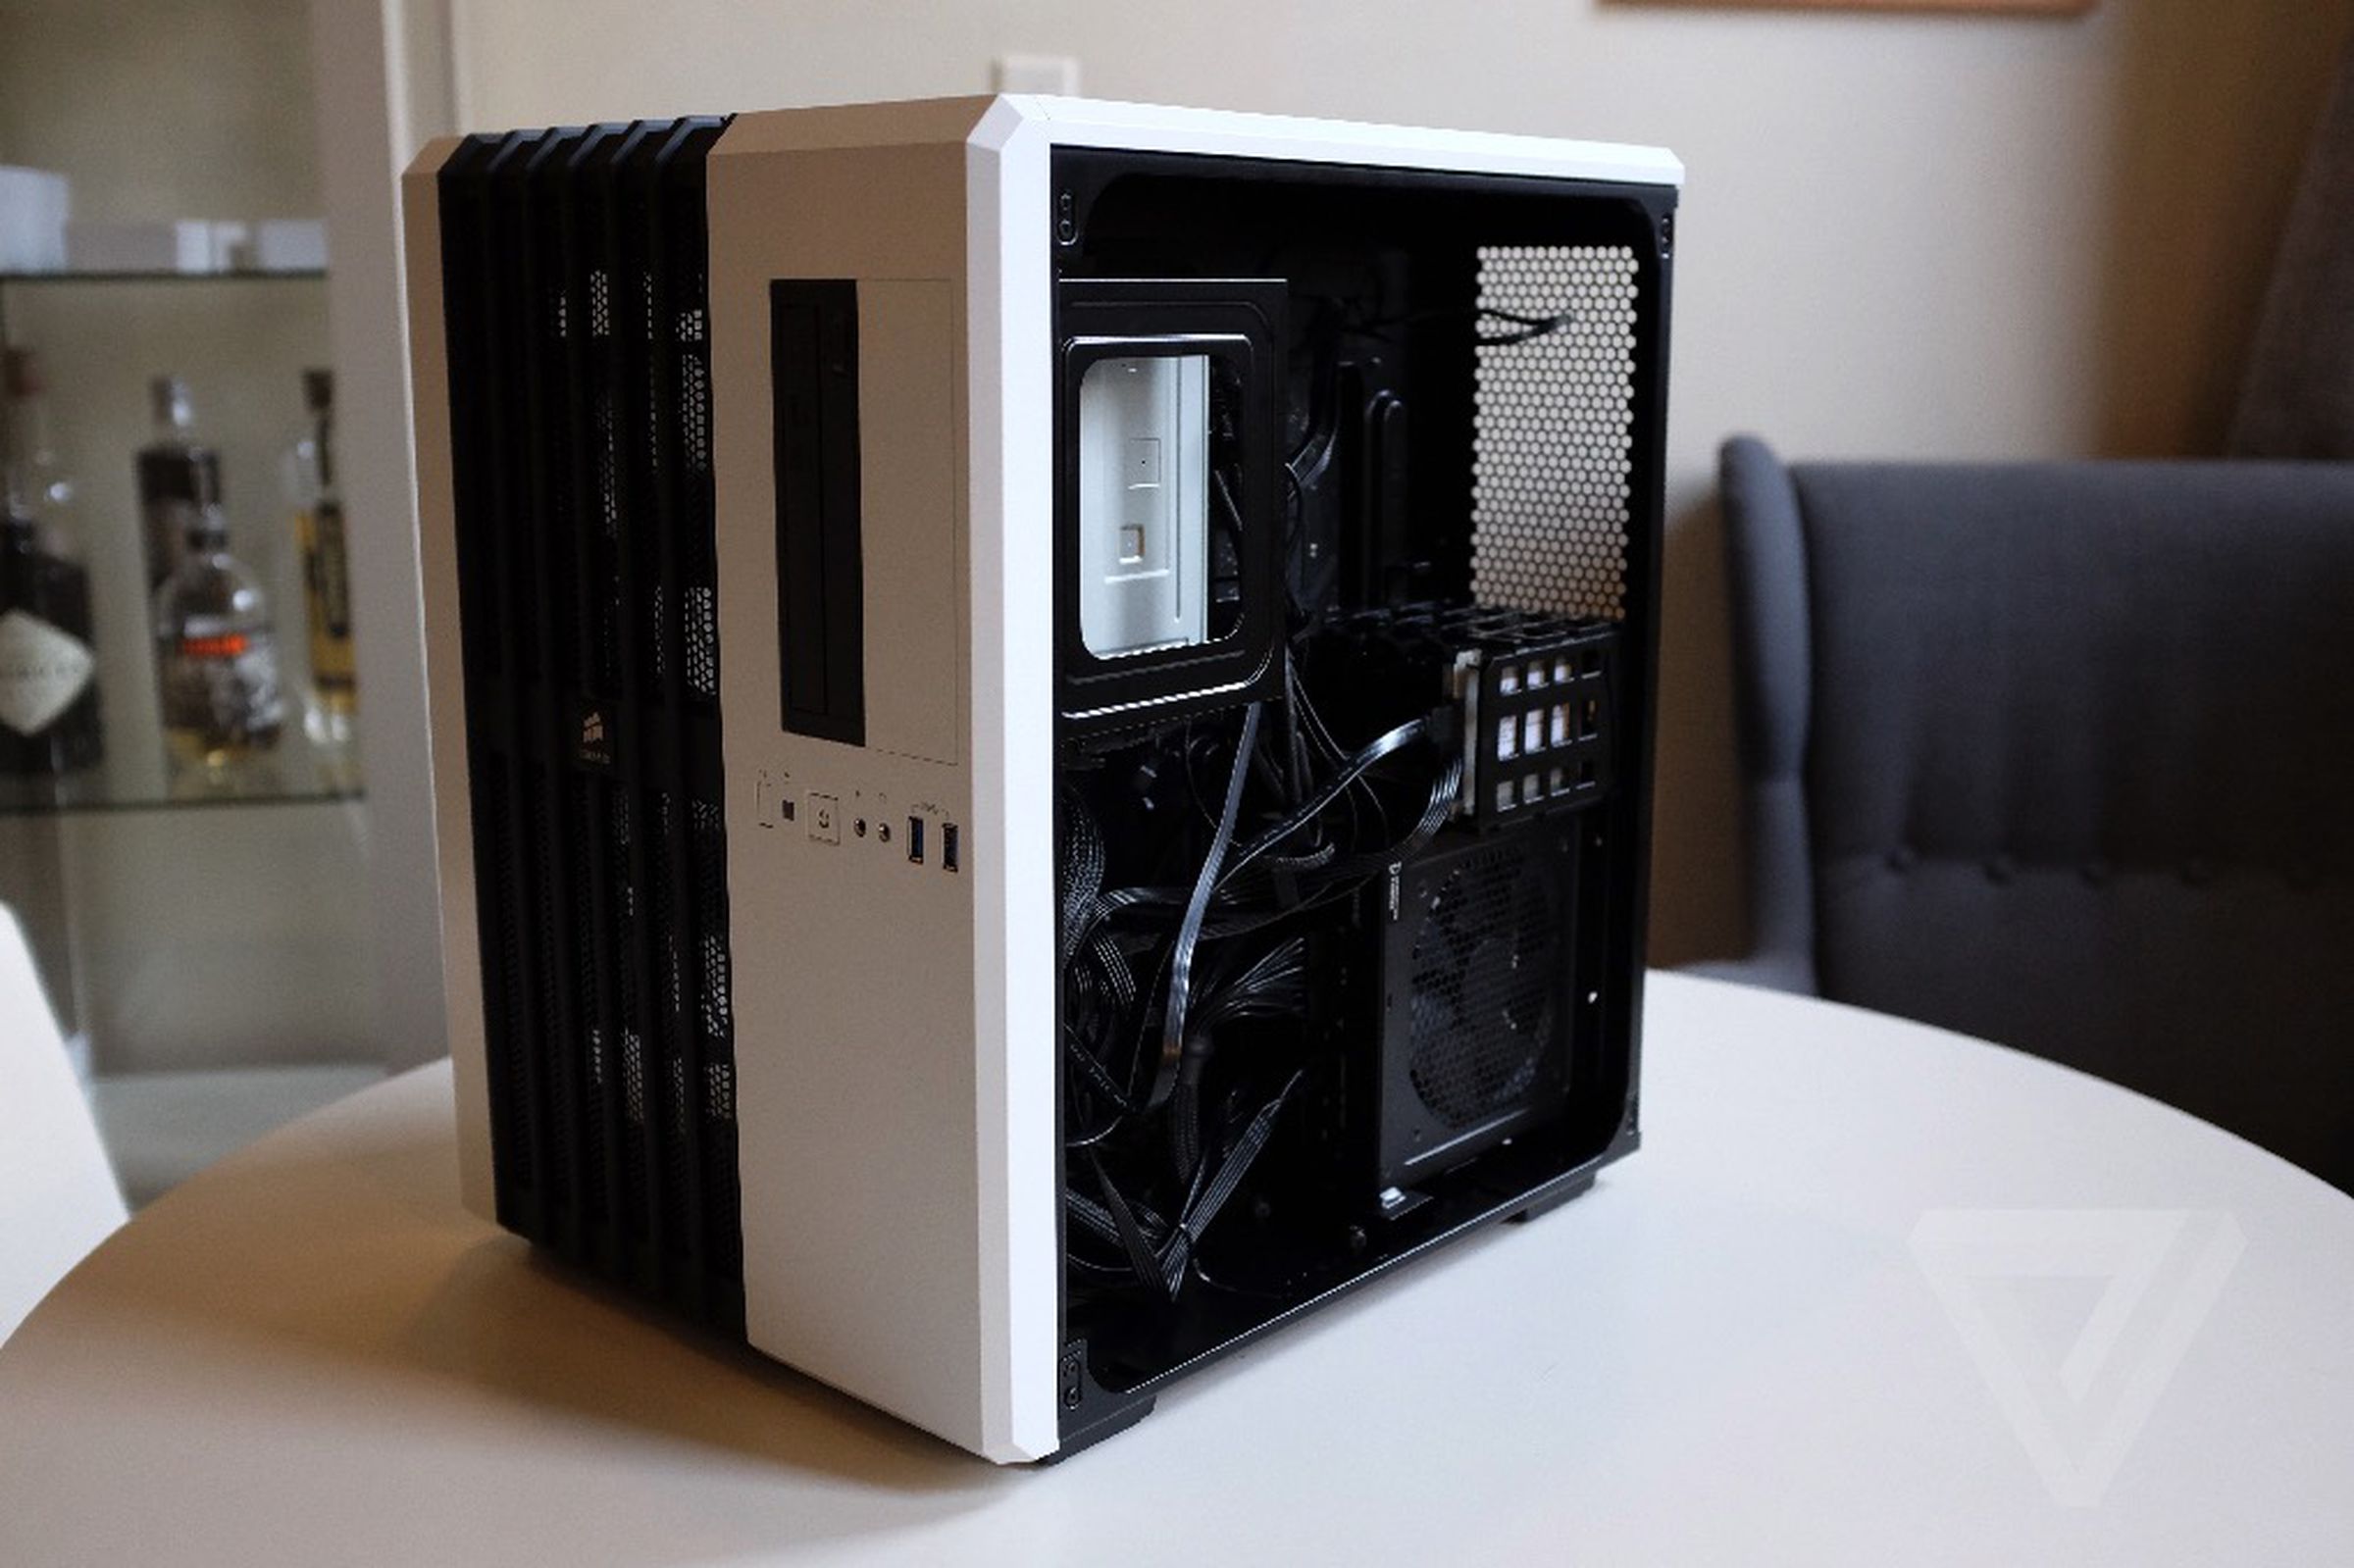 The joy of building a PC, in photos